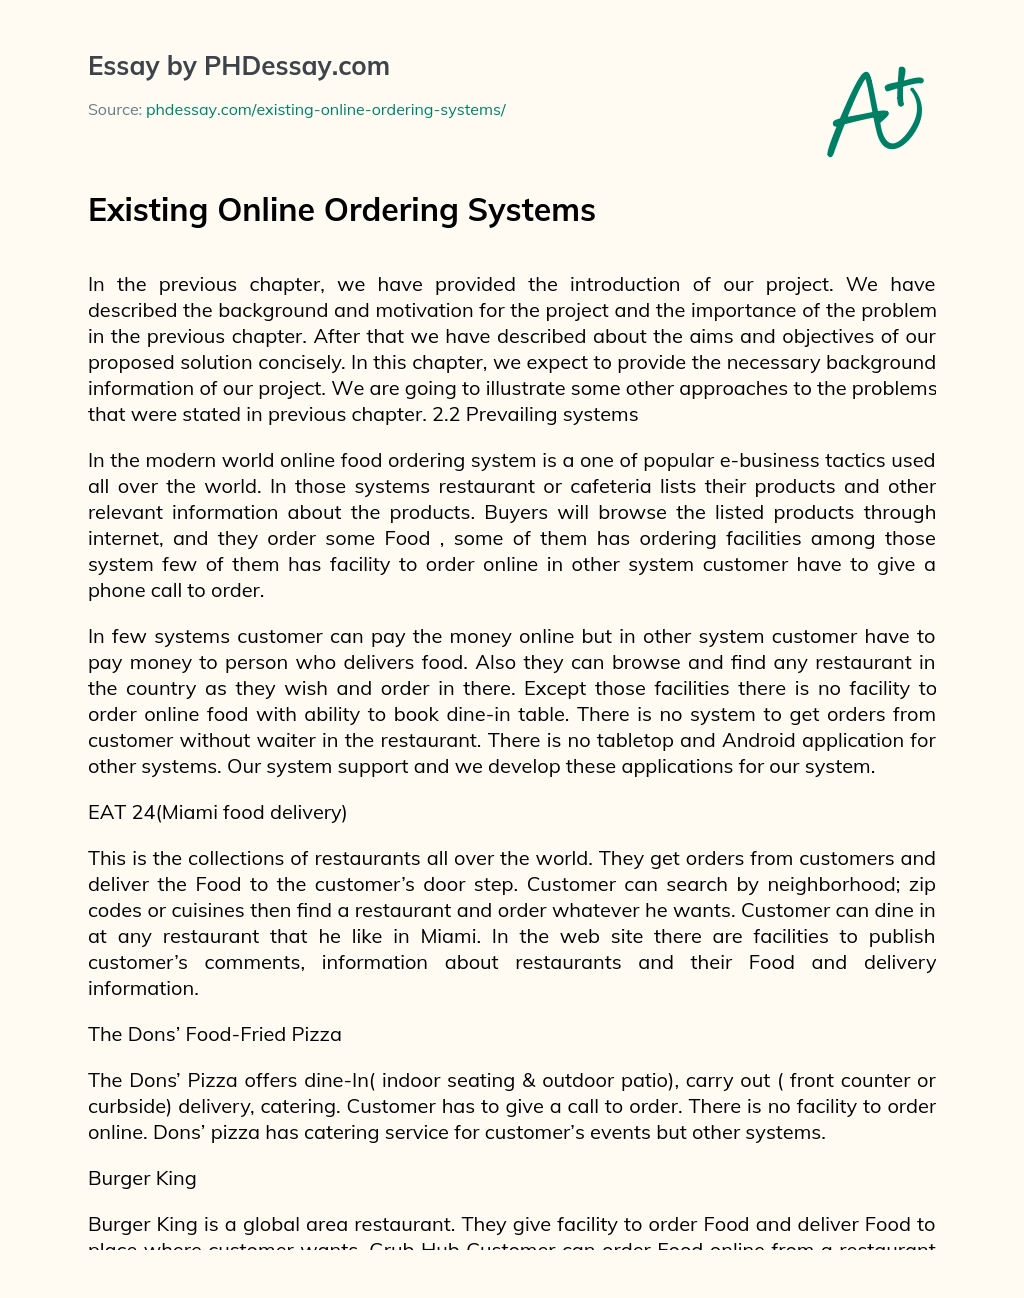 Existing Online Ordering Systems essay